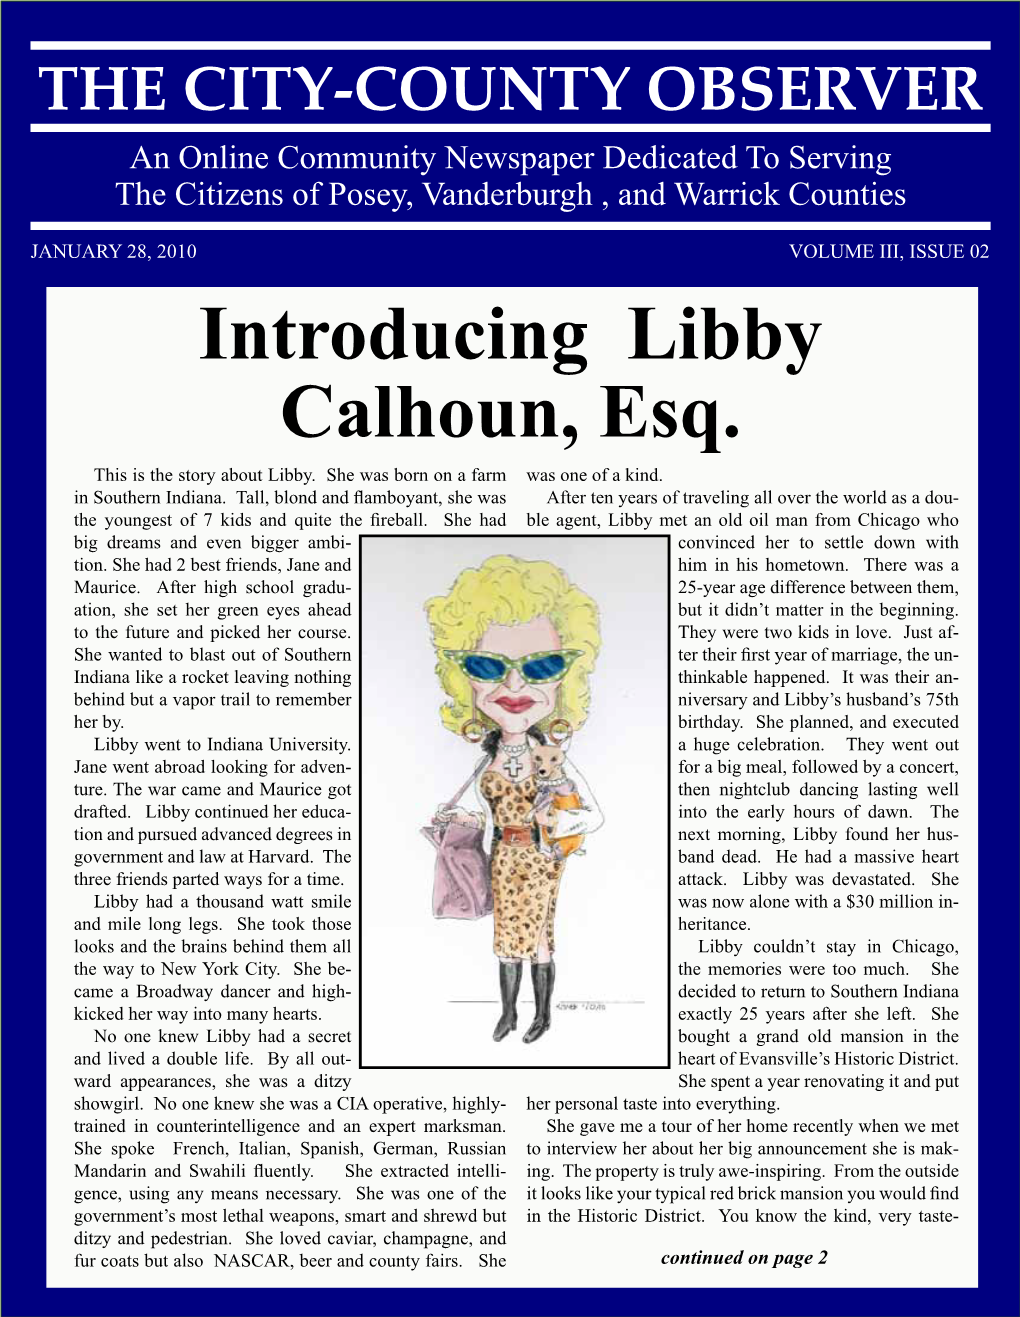 Introducing Libby Calhoun, Esq. This Is the Story About Libby